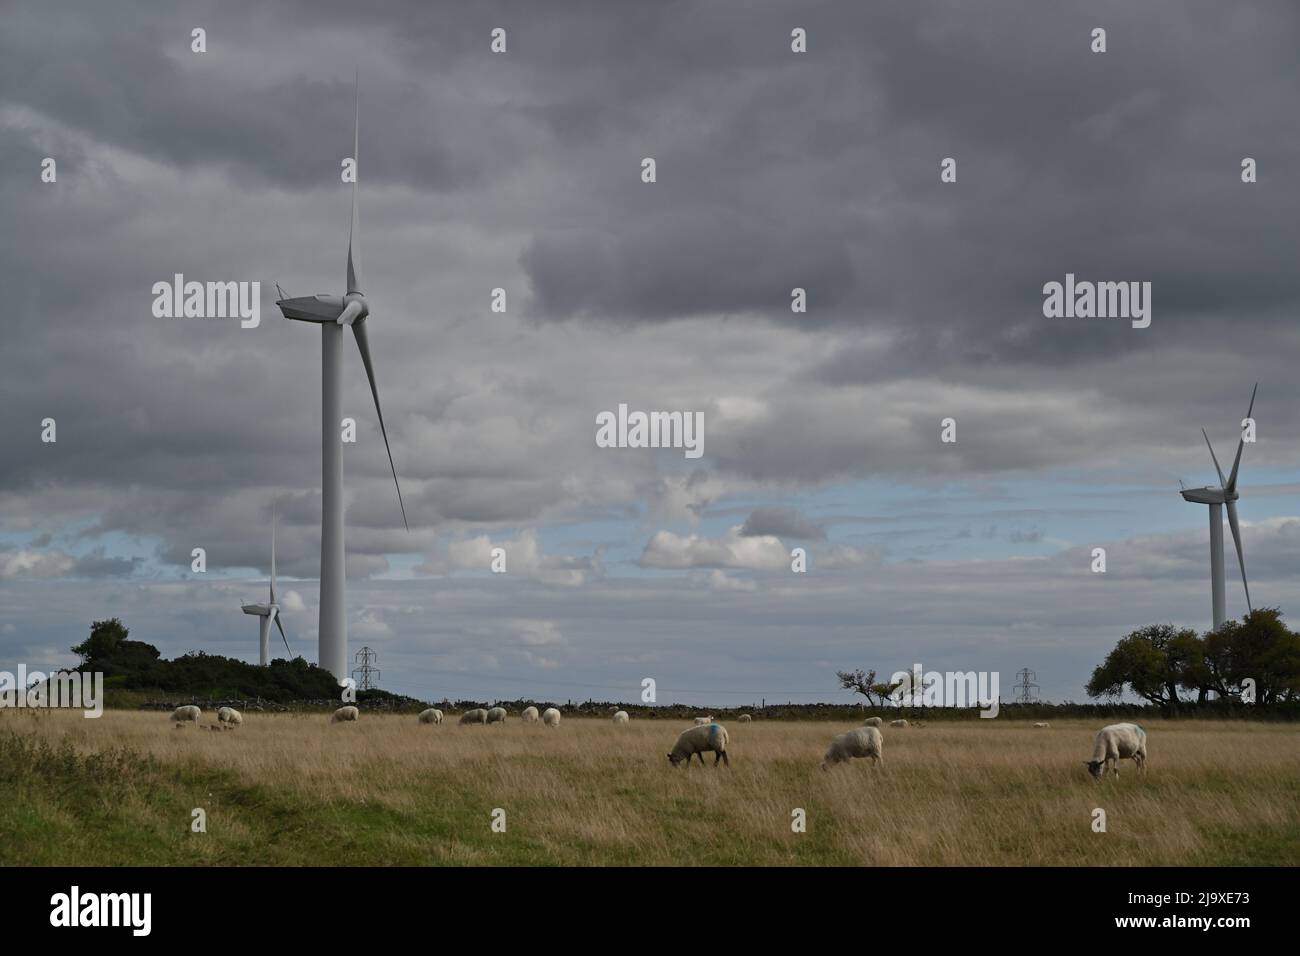 Sheep grazing in a field with wind turbines behind on a cloudy day Stock Photo